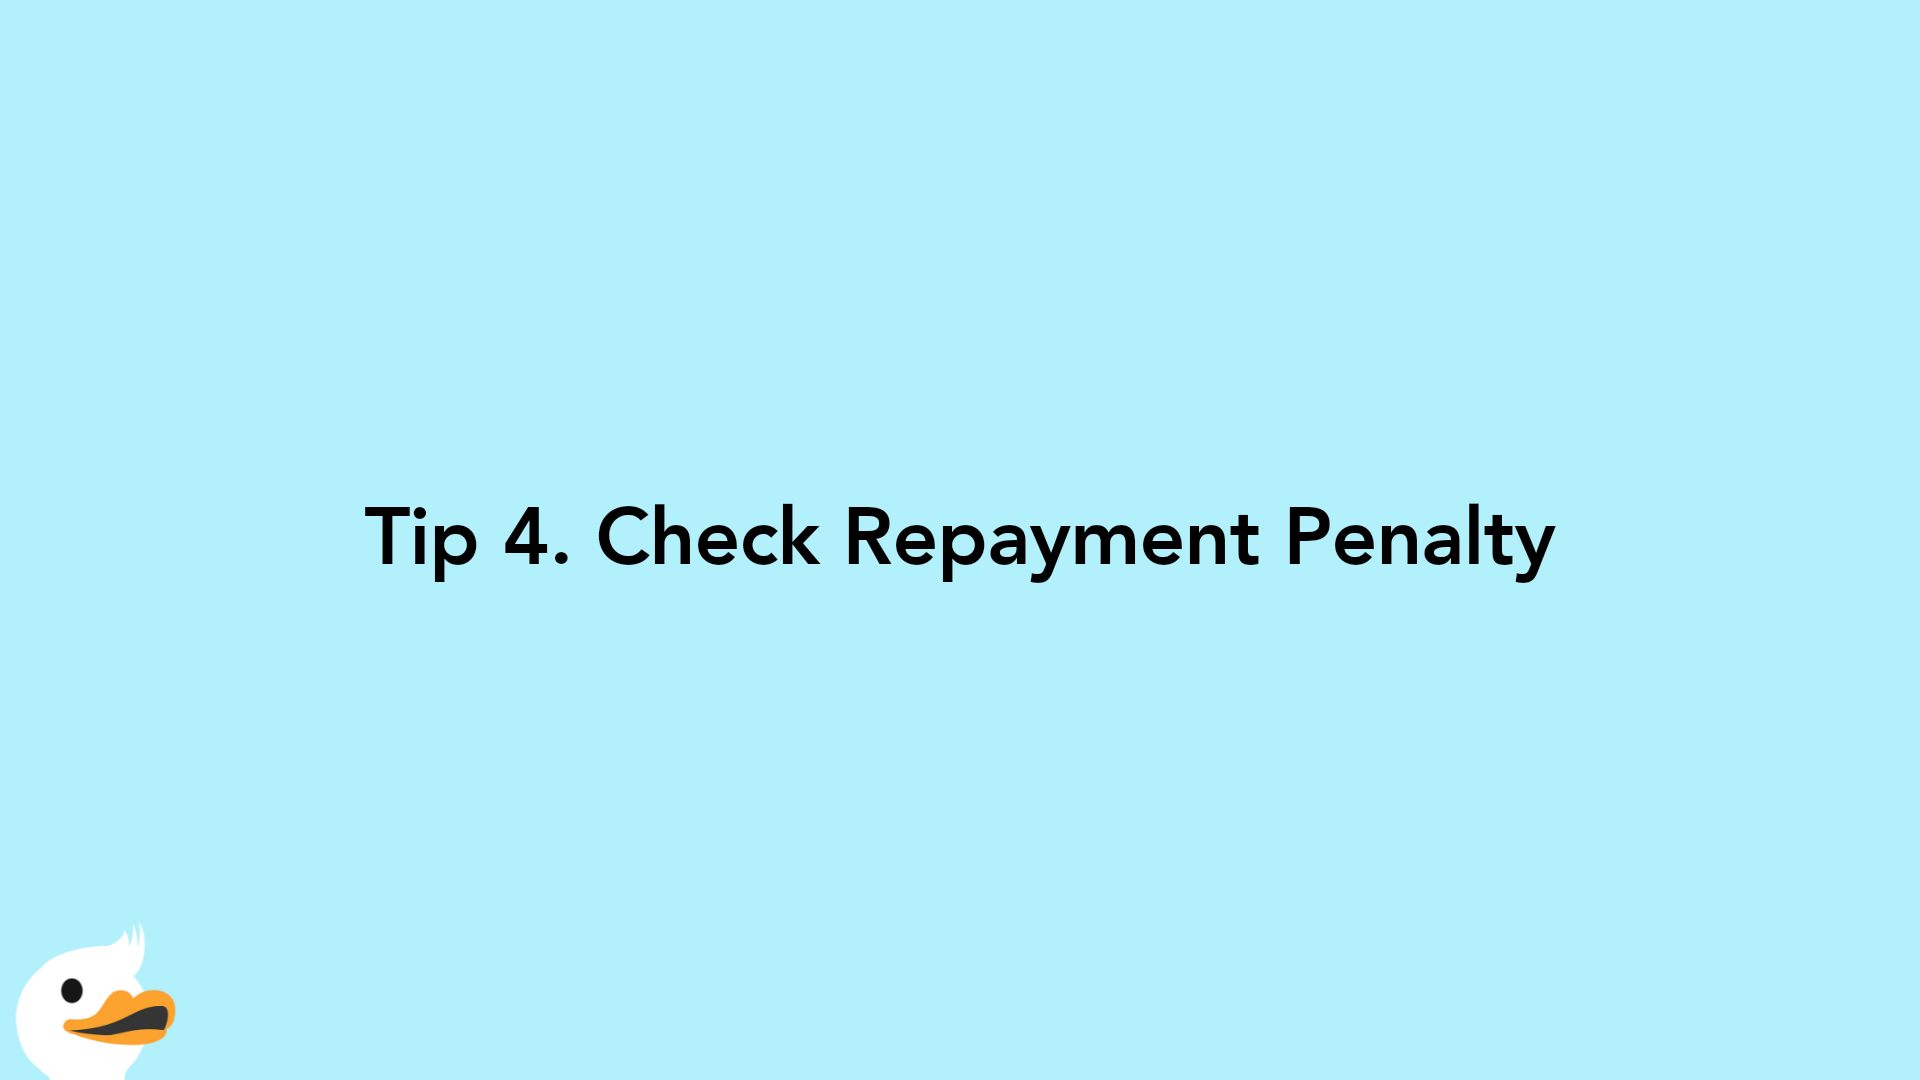 Tip 4. Check Repayment Penalty